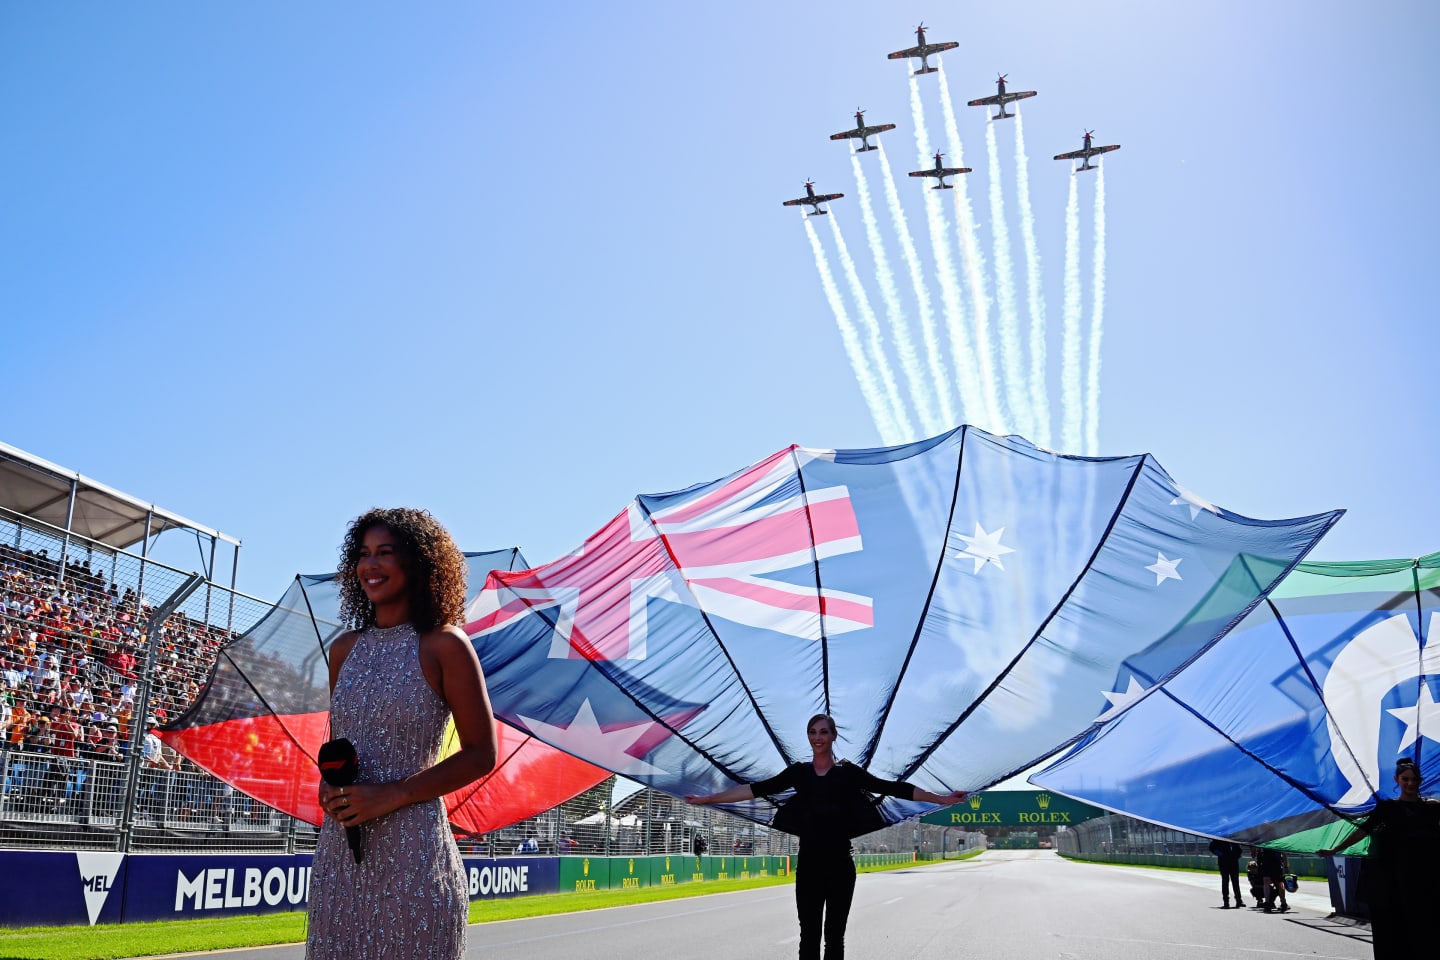 MELBOURNE, AUSTRALIA - MARCH 24: An aerial display is seen above the national anthem performer on